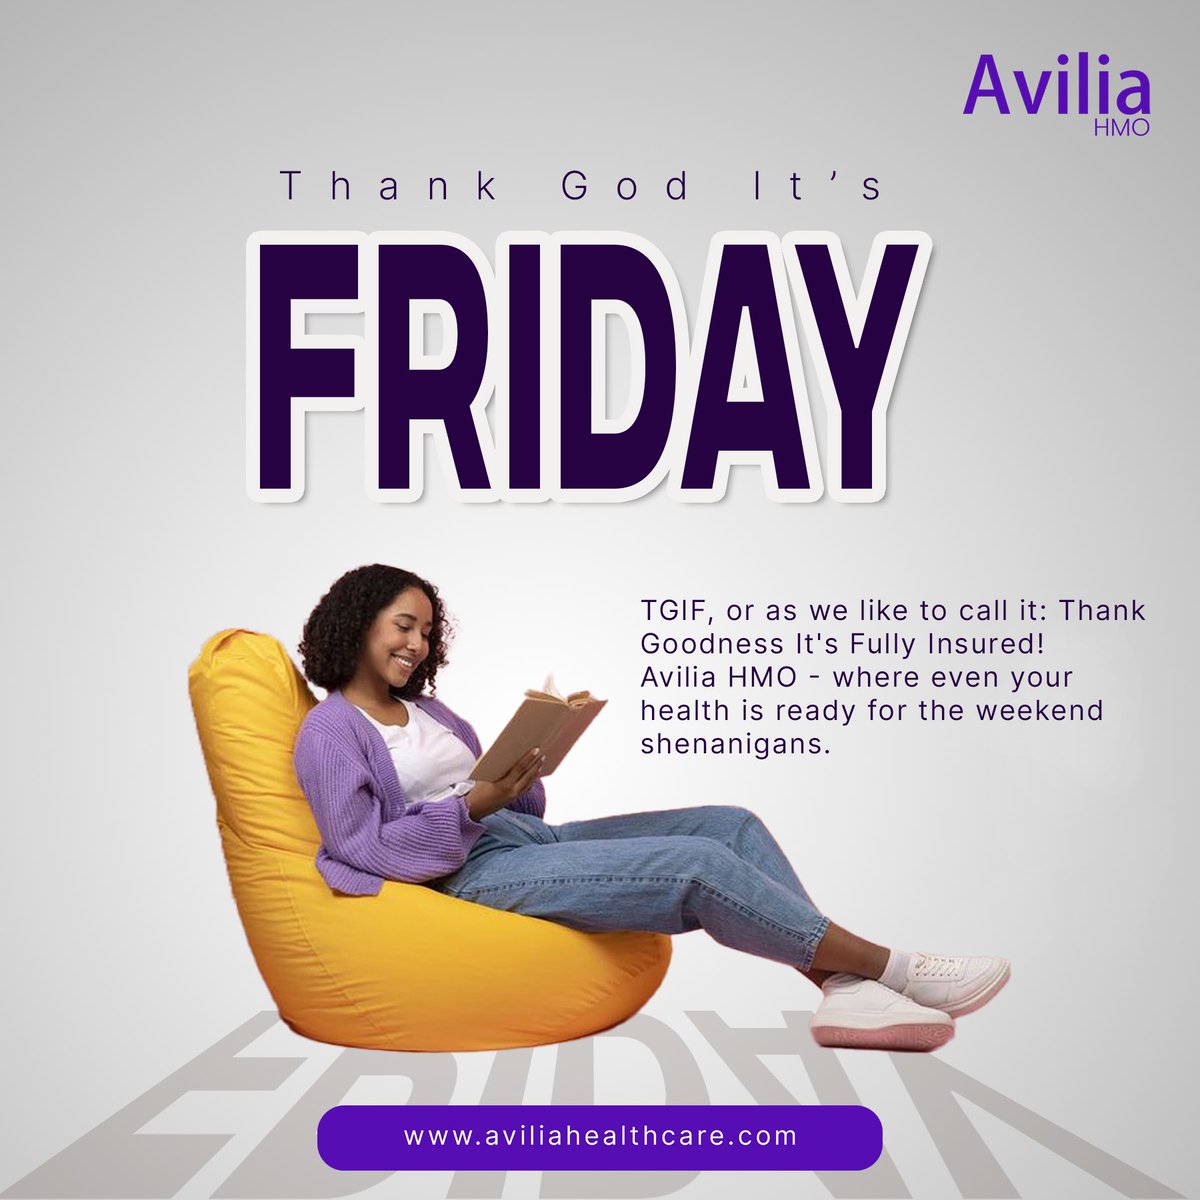 avilia_hmo It's finally Friday, and while we can't promise to cure your weekenditis, we're here to ensure your health is in top shape for all the fun ahead.
#HealthcareNigeria #HMOinNigeria #HealthInsurance
#NigerianHealth
#WellnessWednesday
#HealthCoverage